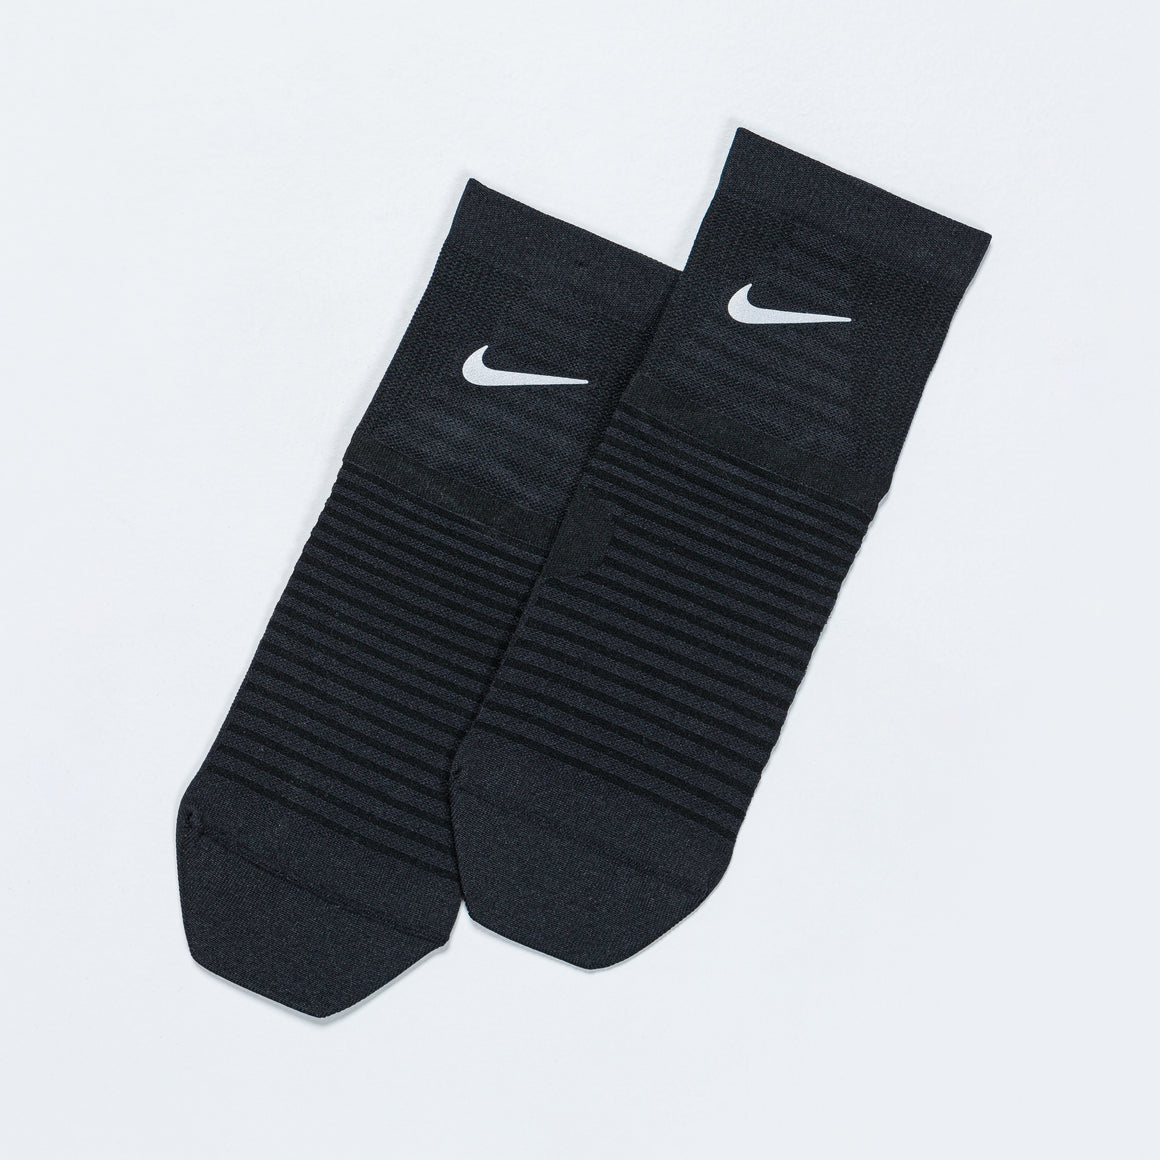 Nike - Spark Lightweight Ankle - Black/Reflective - Up There Athletics